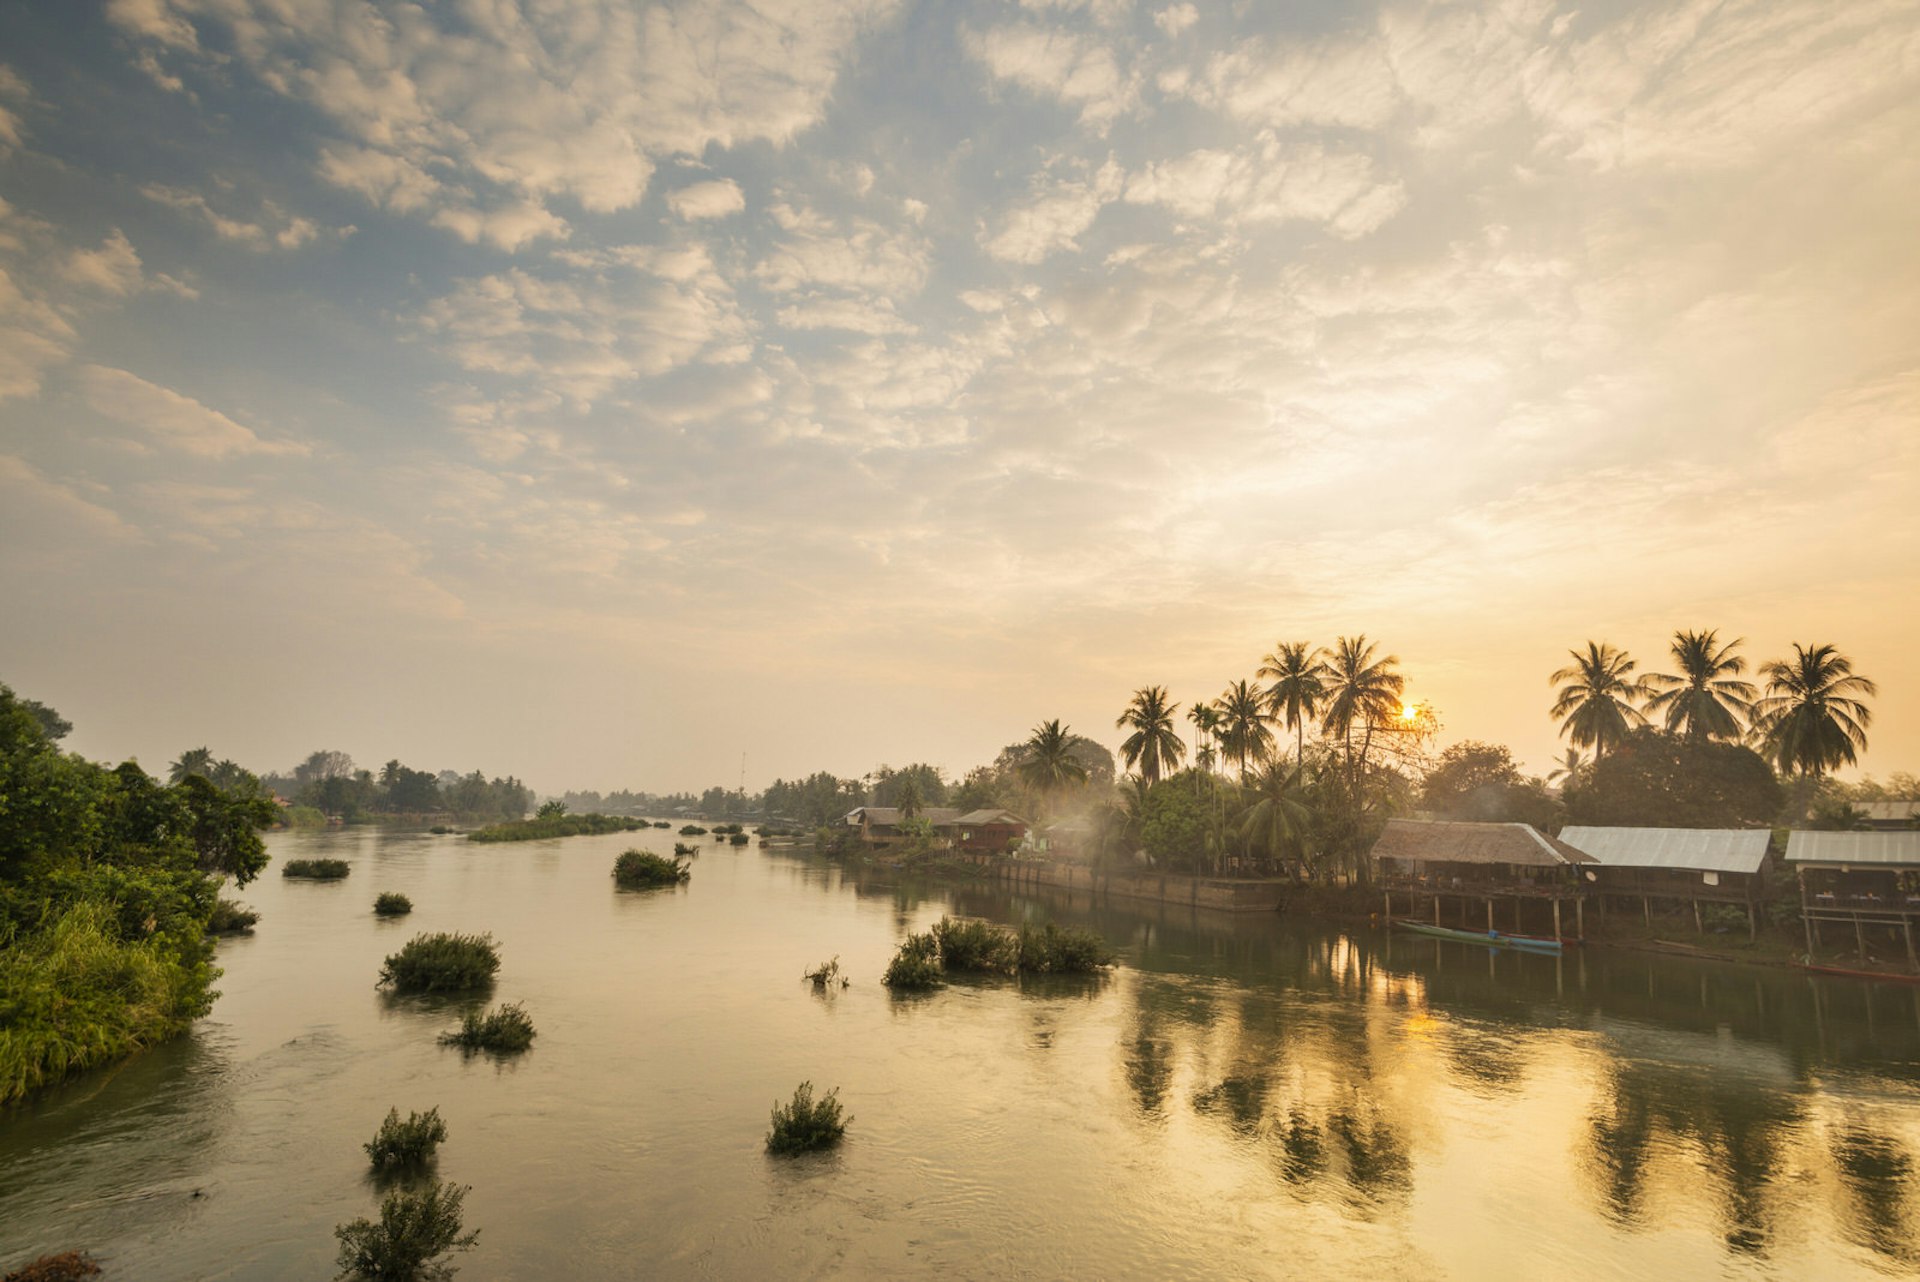 A view of the Mekong River, Laos 